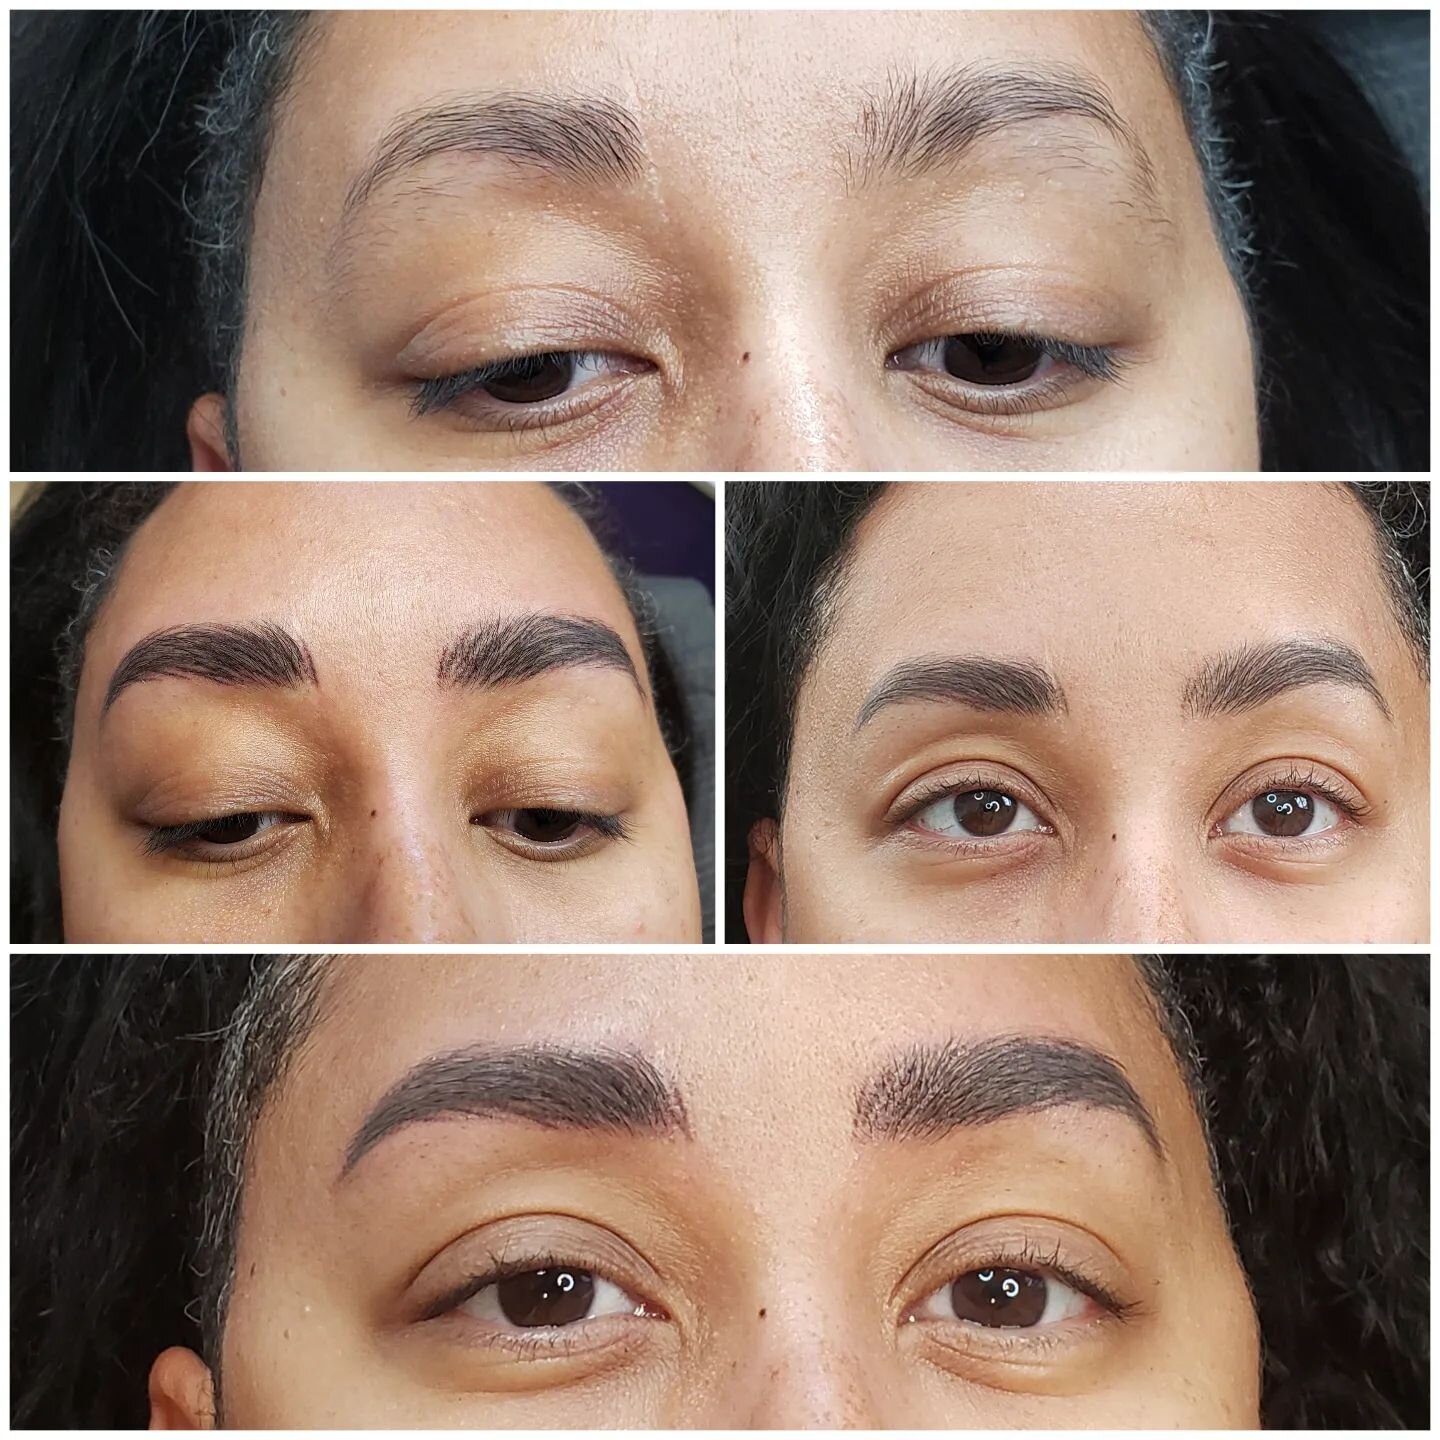 A process of brows! 📸📸📸📸

👉One the top the orginal before 
👉 In the middle are directly after first session and healed result of that session before touch up. 
👉 The bottom picture final result after the 6 week touch up

I fully believe in the